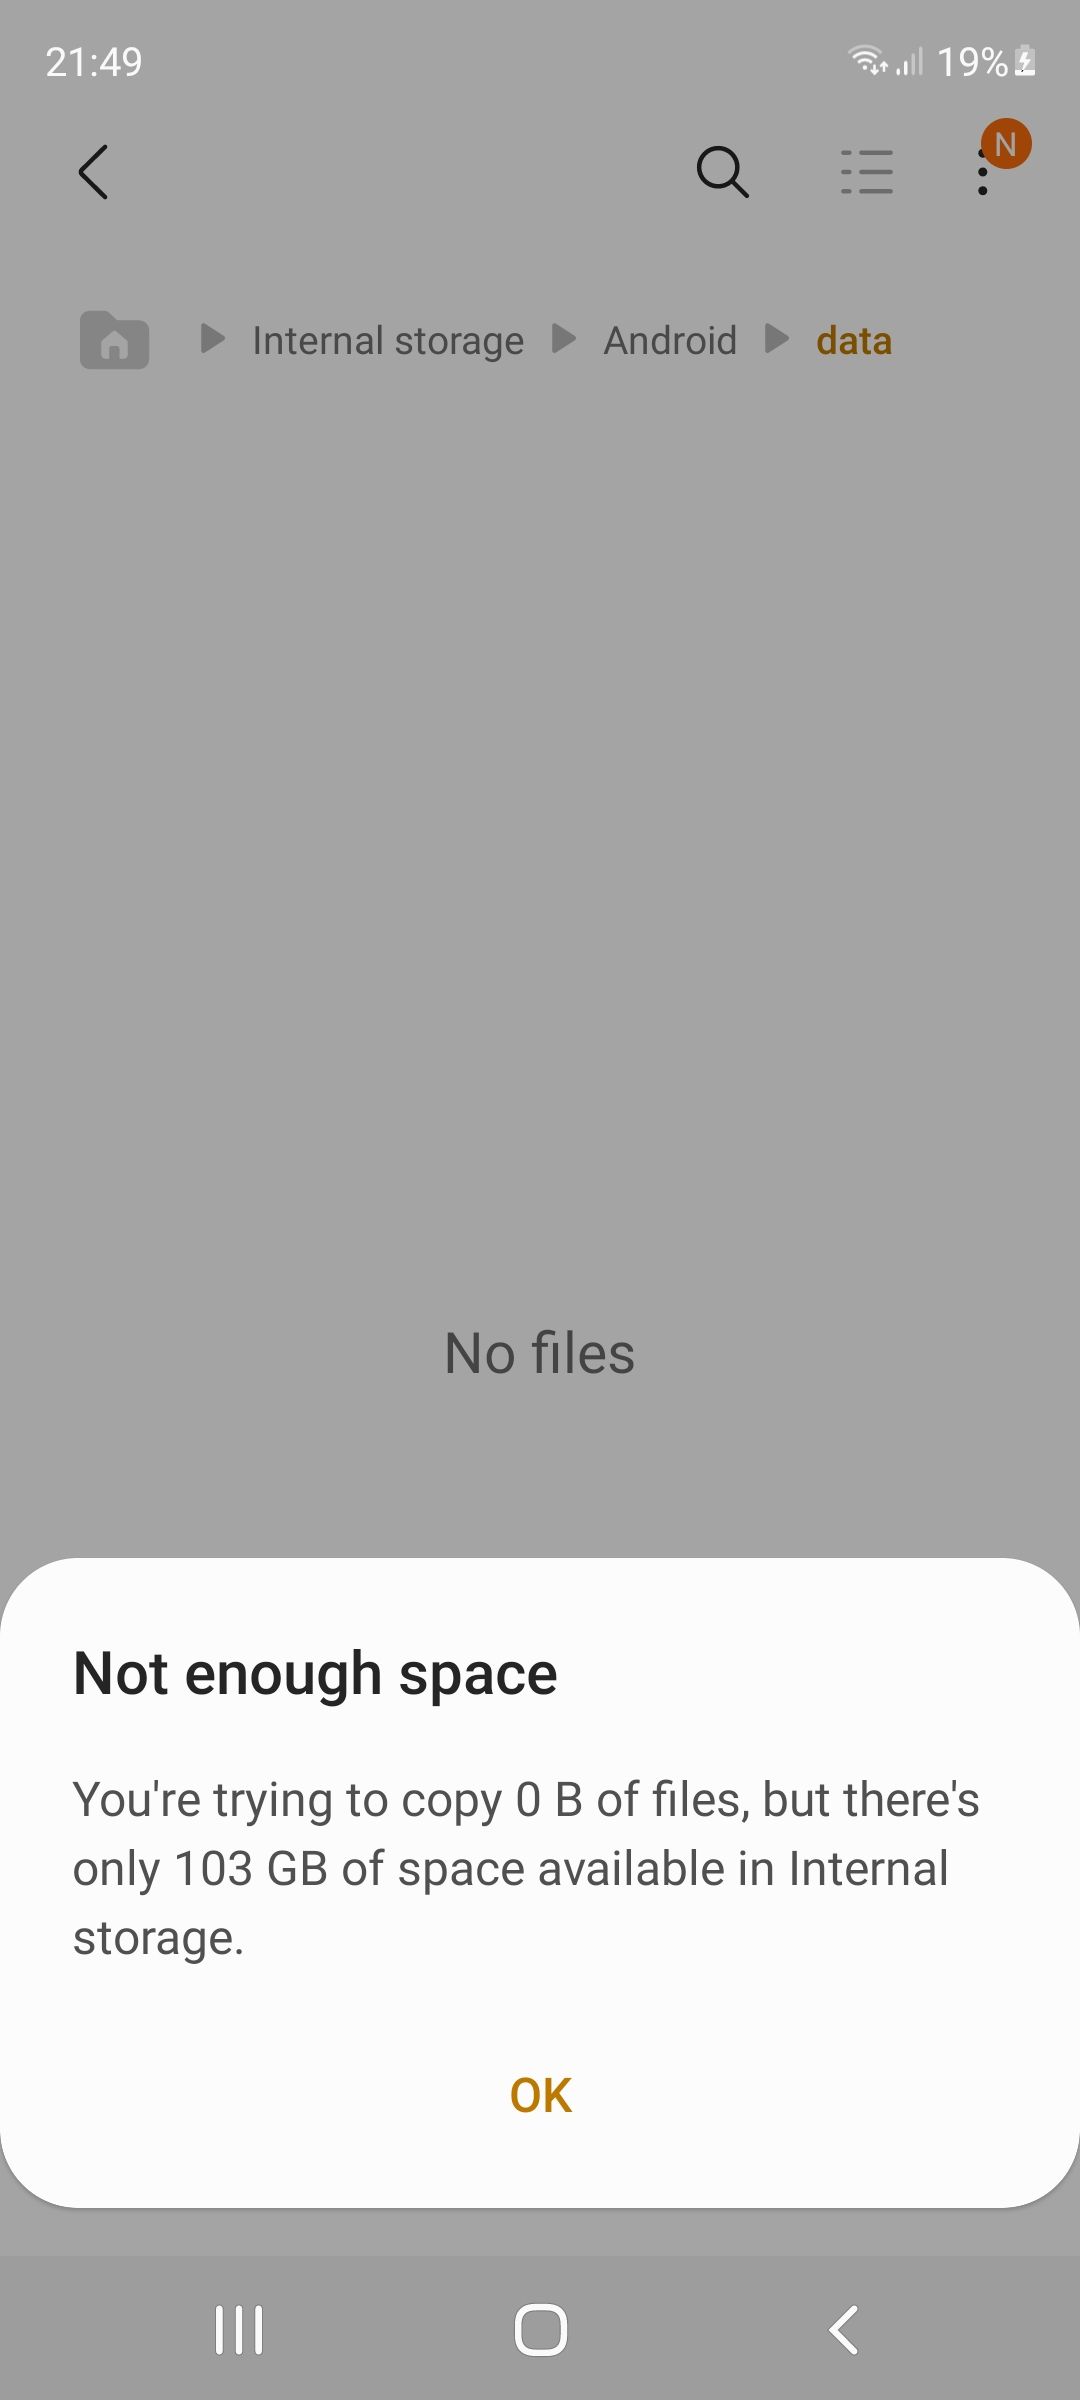 denied access to my files data - Samsung Community